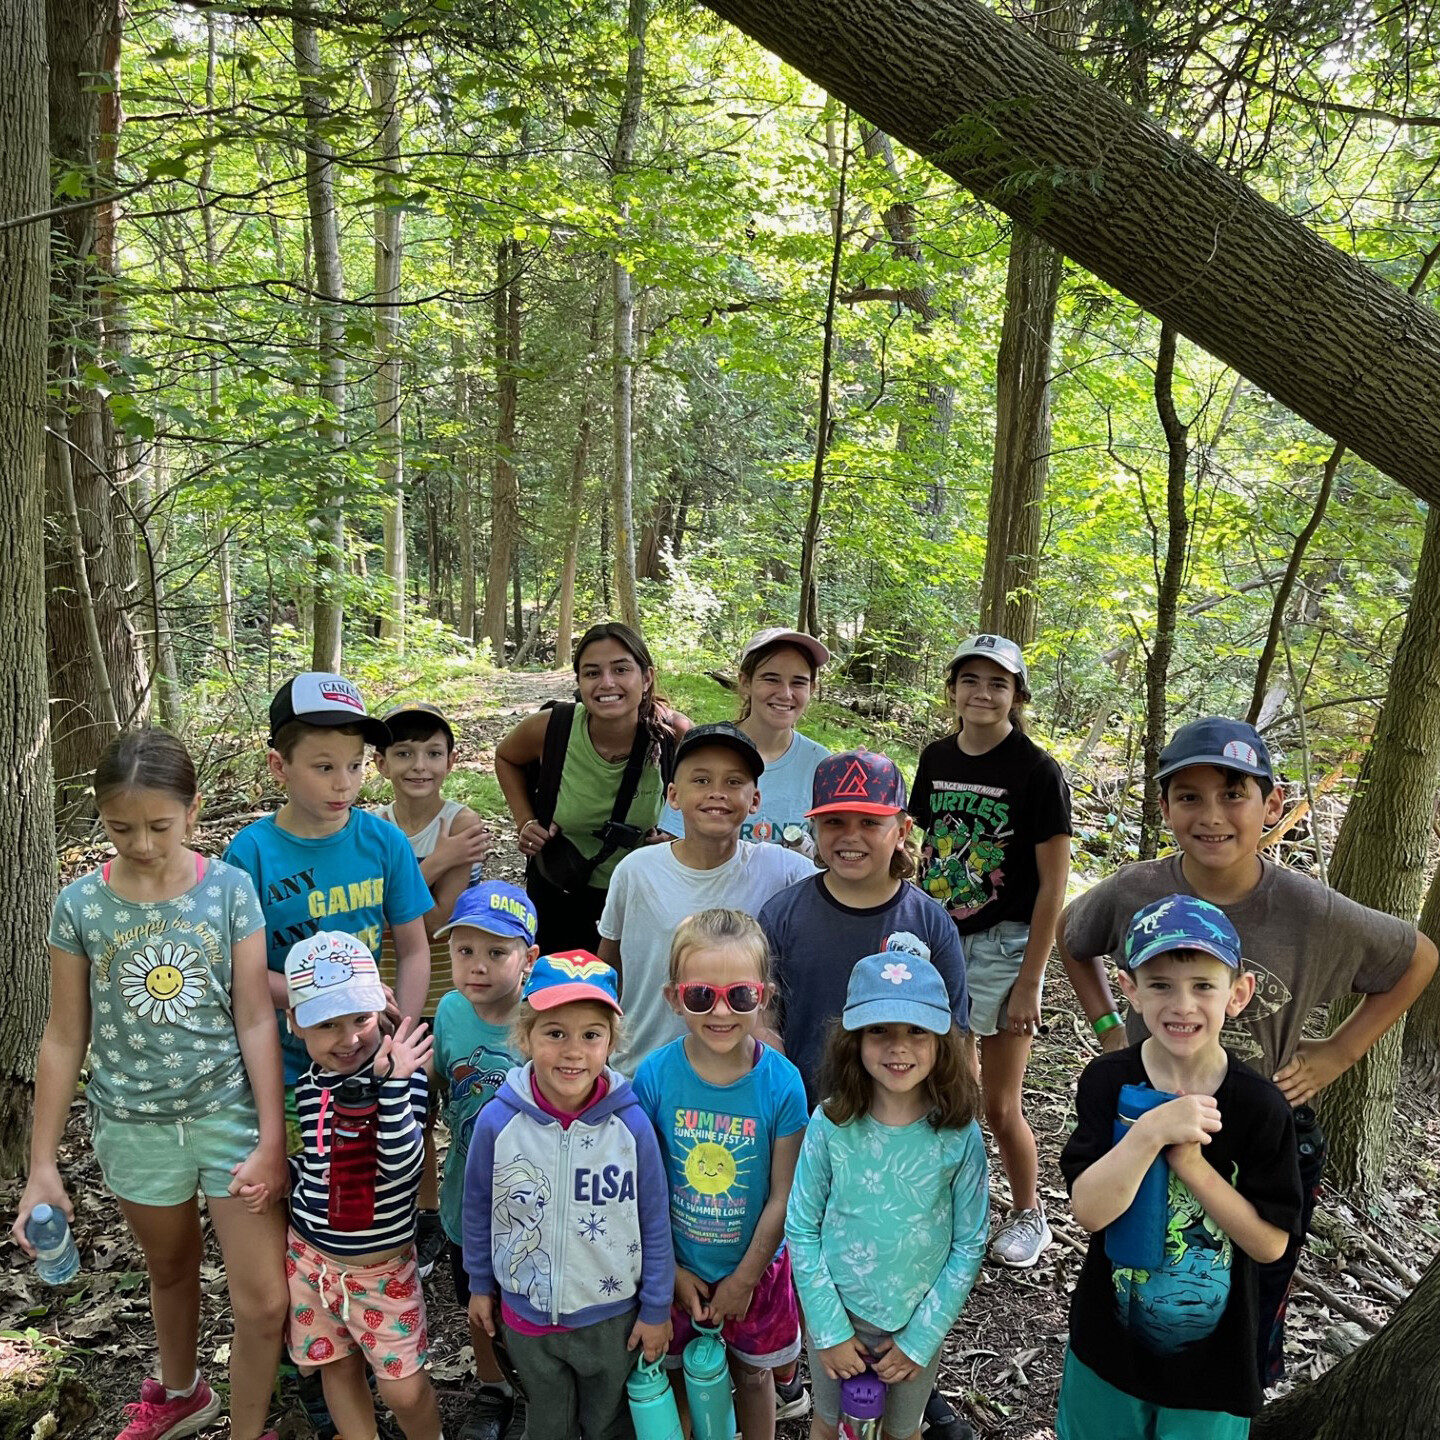 Acorn camp kids posing for picture along trail